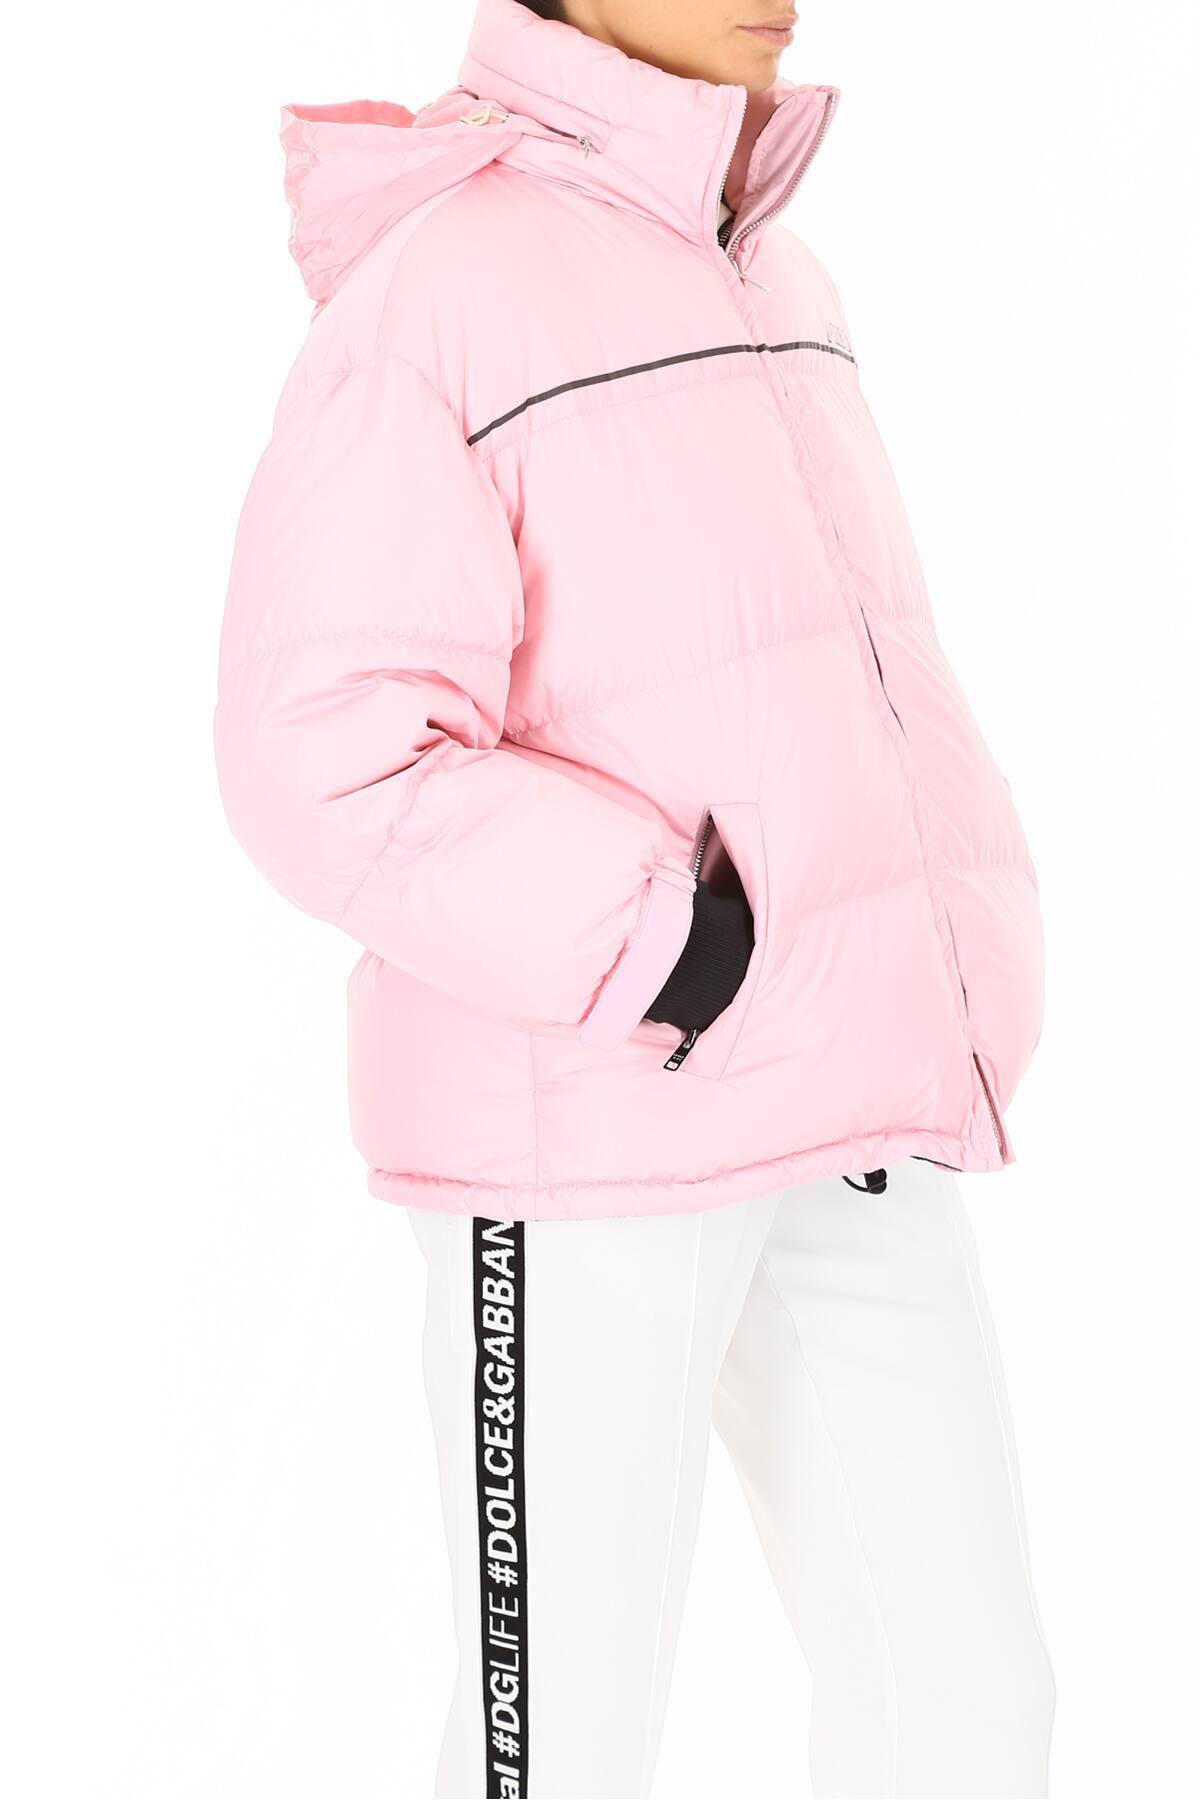 Prada Linea Rossa Synthetic Puffer Jacket With Logo Patch in Pink - Lyst